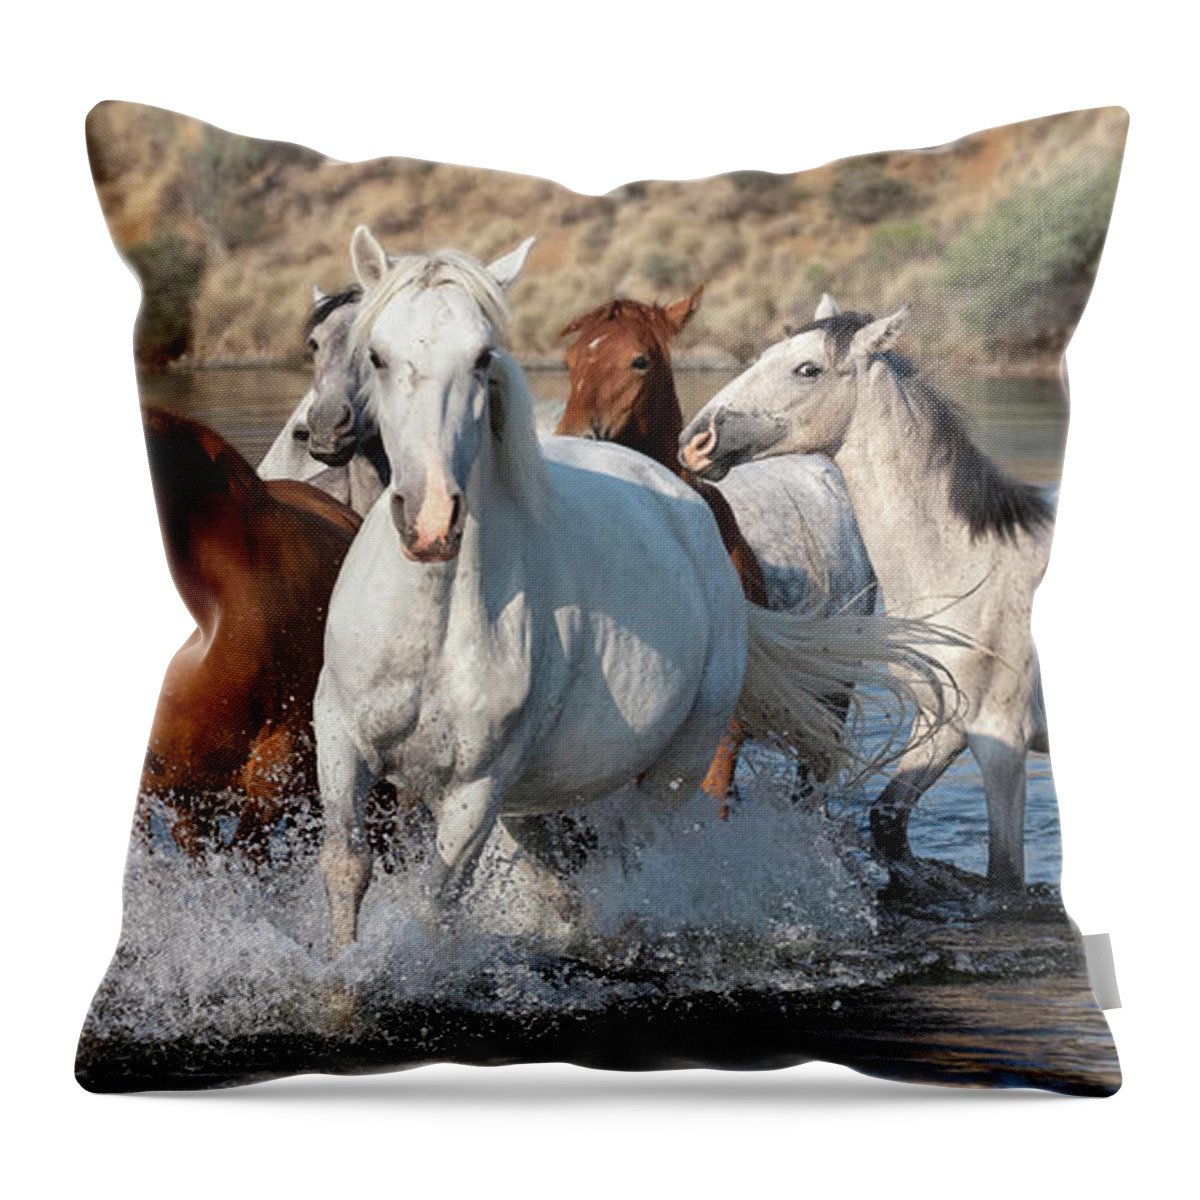  Throw Pillow featuring the photograph A Colorful Band. by Paul Martin